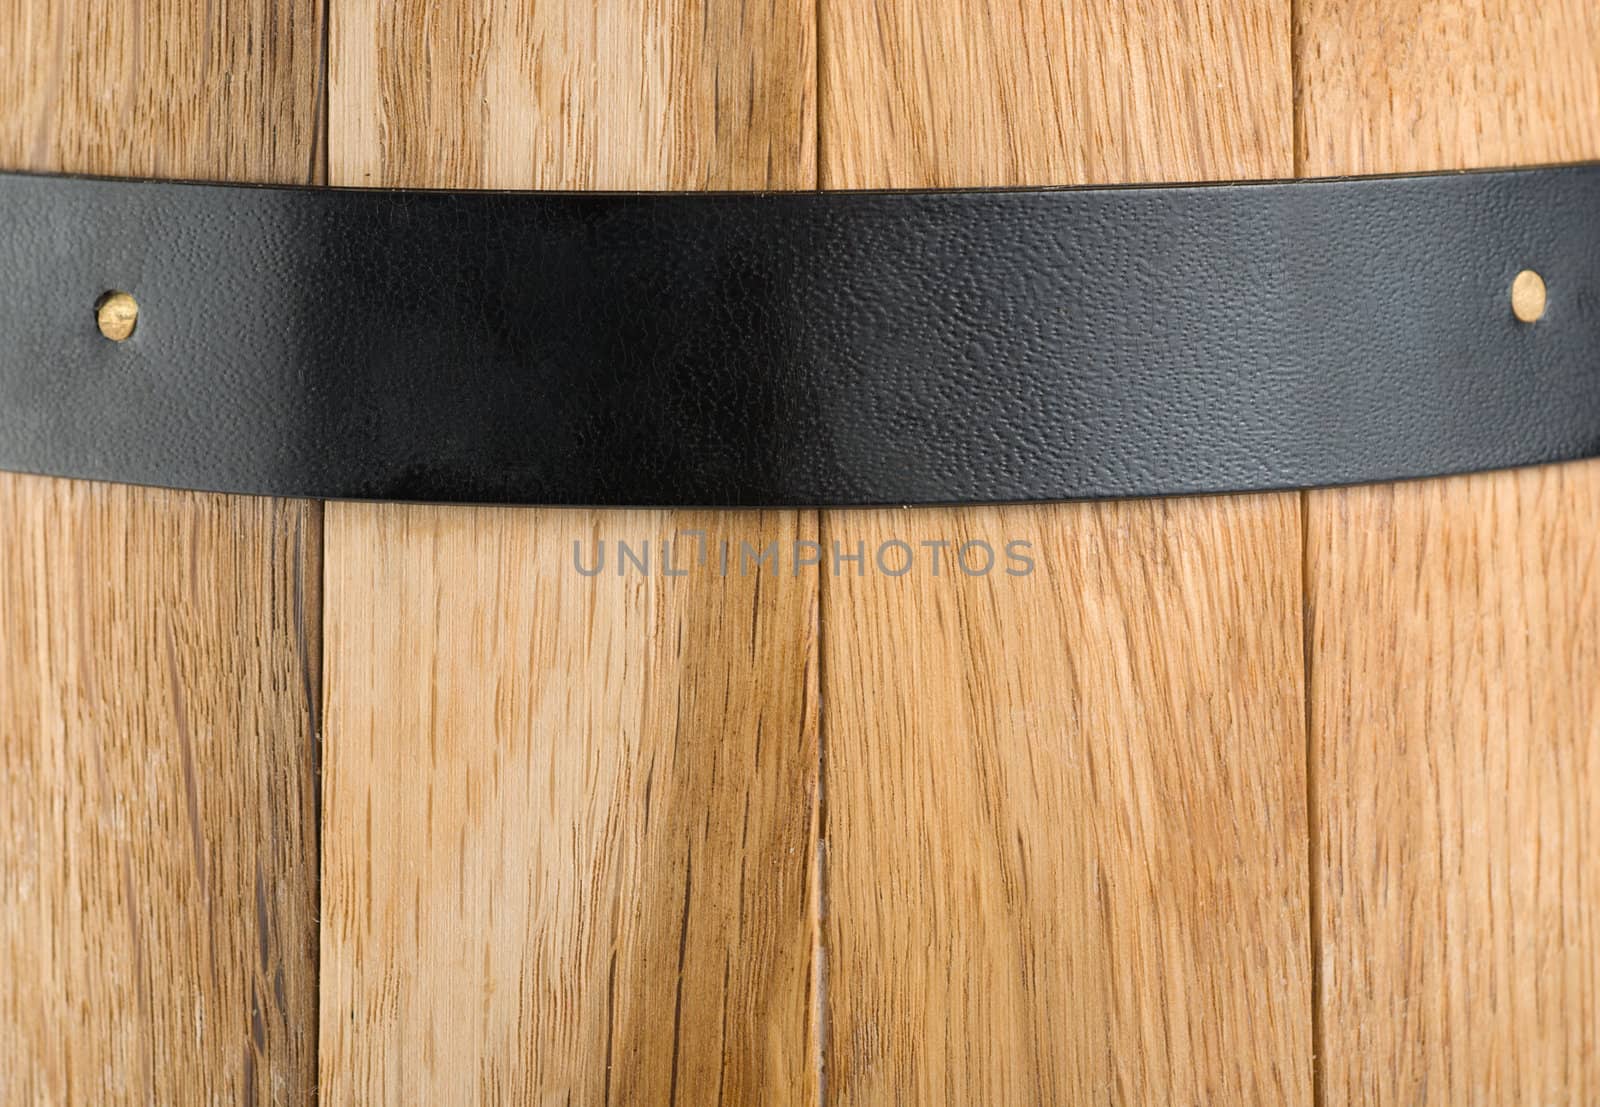 Background of a wooden barrel and a metal strip